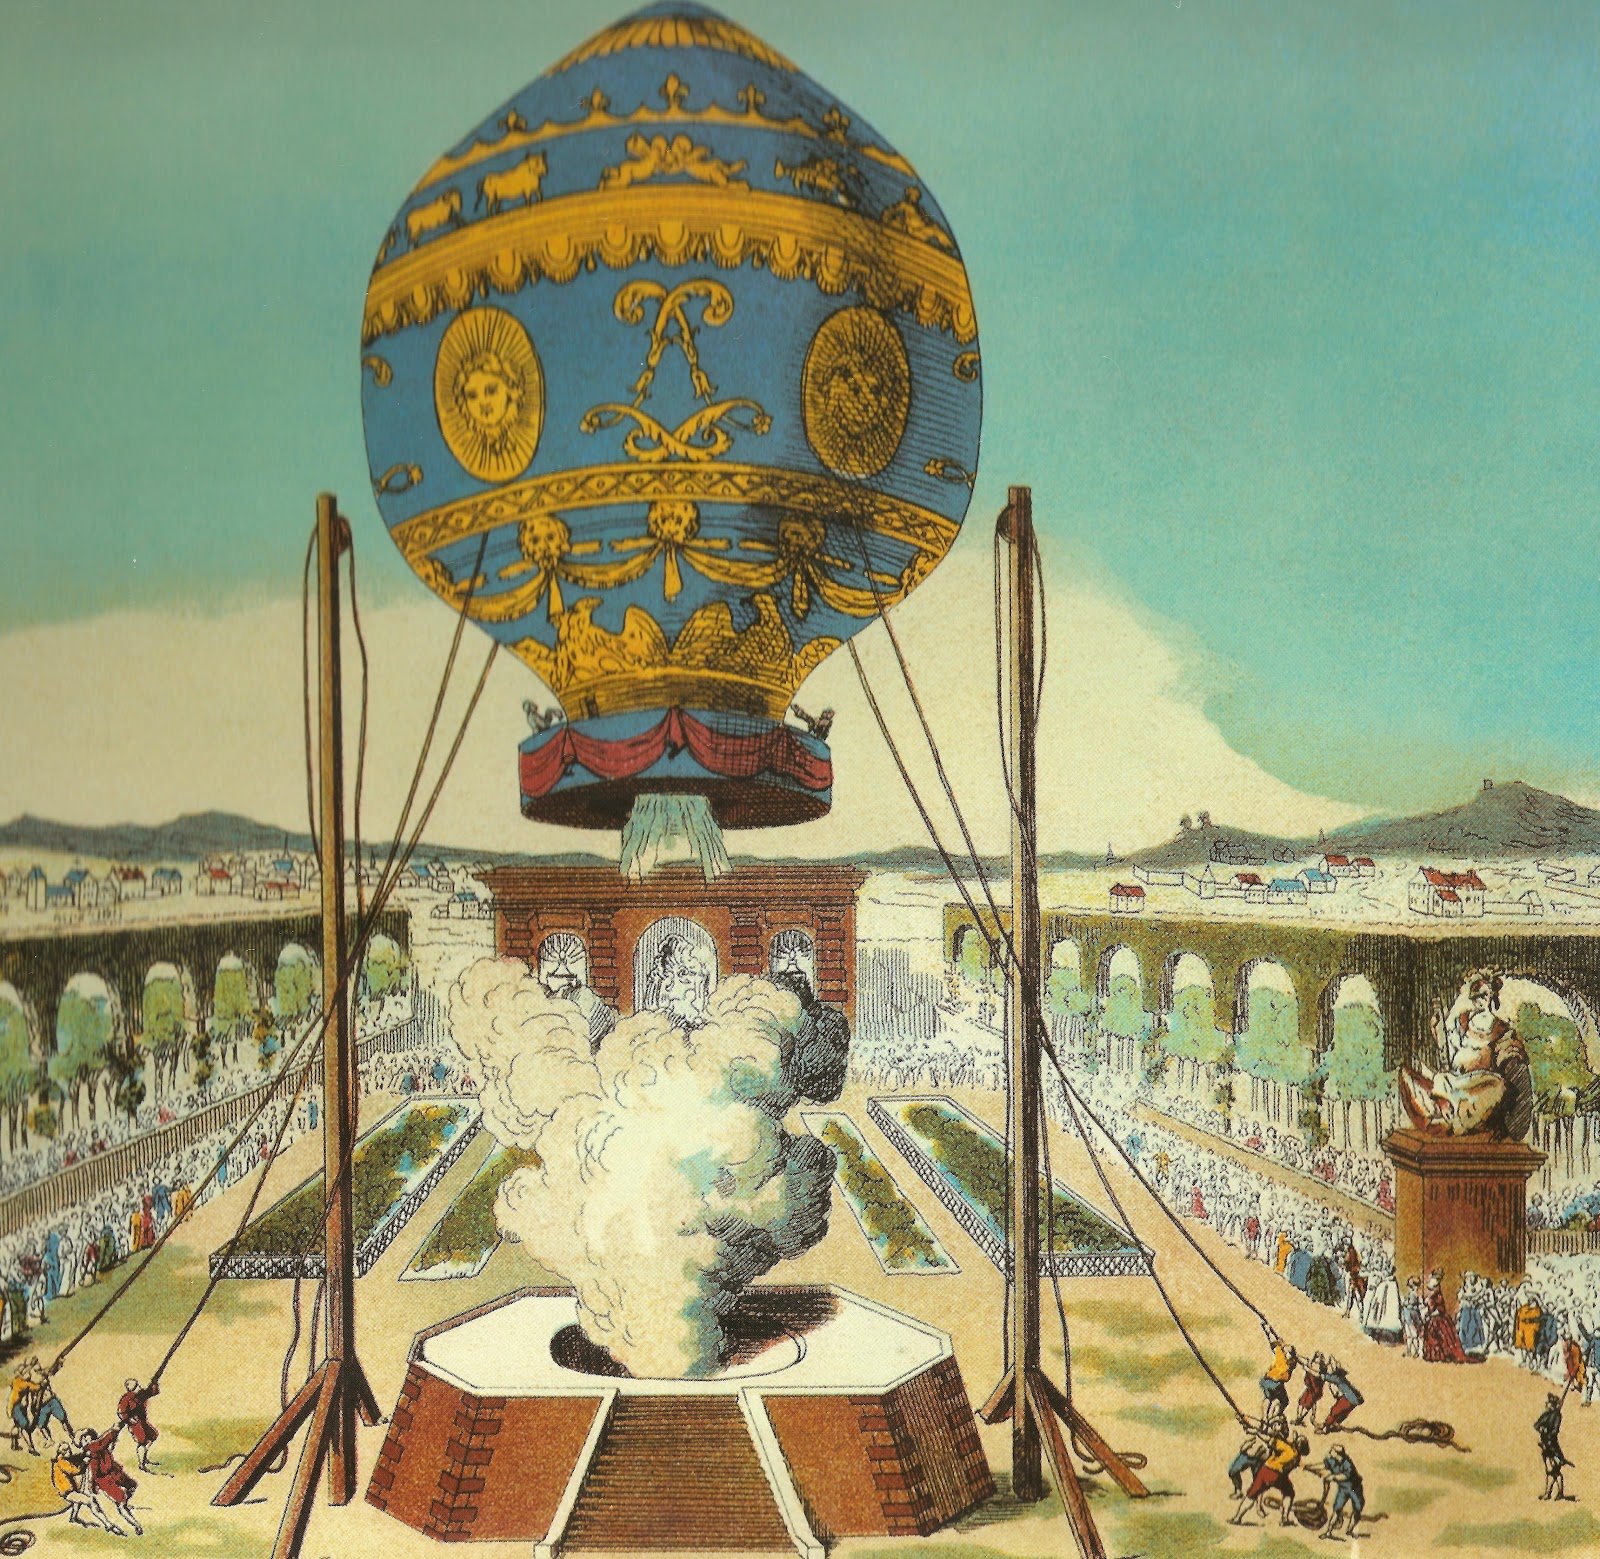 An illustrations of the Montgolfier Brothers flight